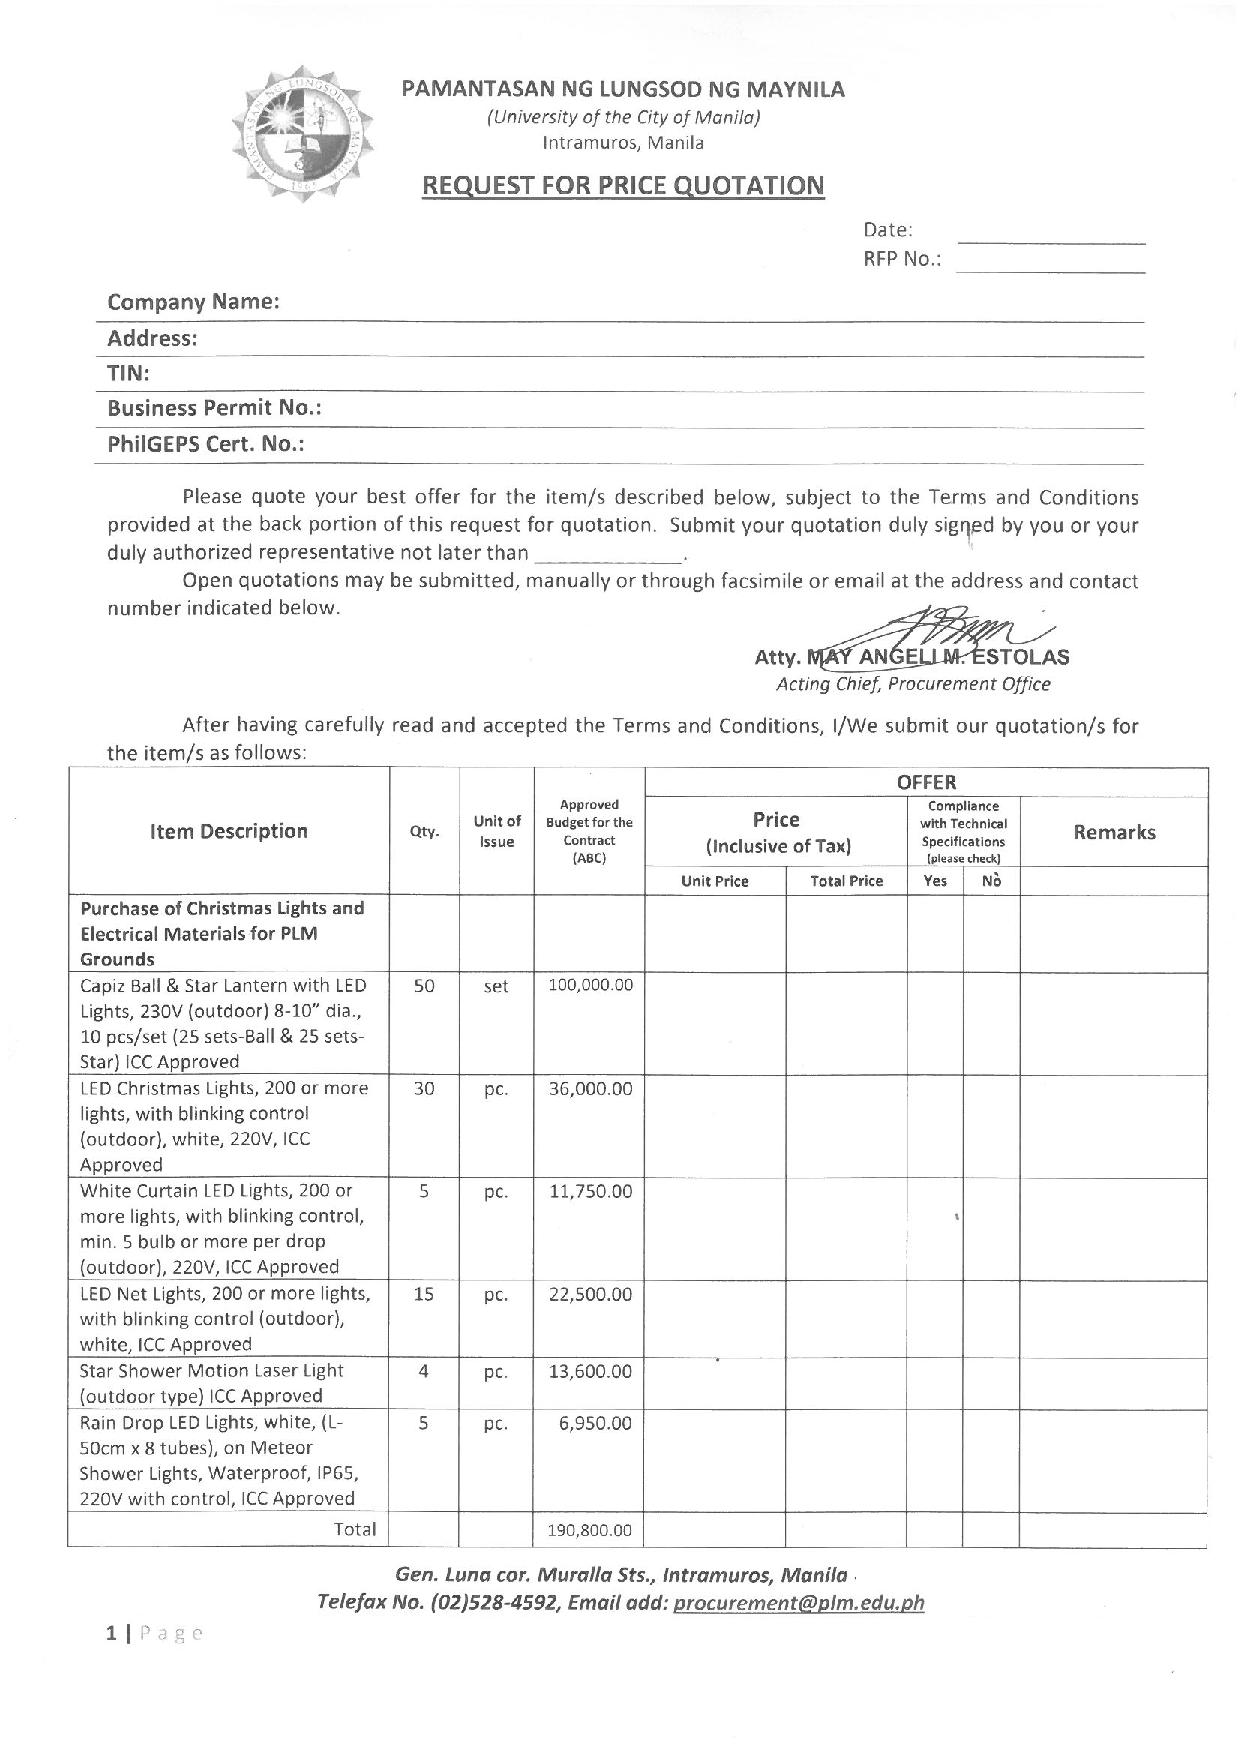 Request for Price Quotation Form Christmas Lights page 001